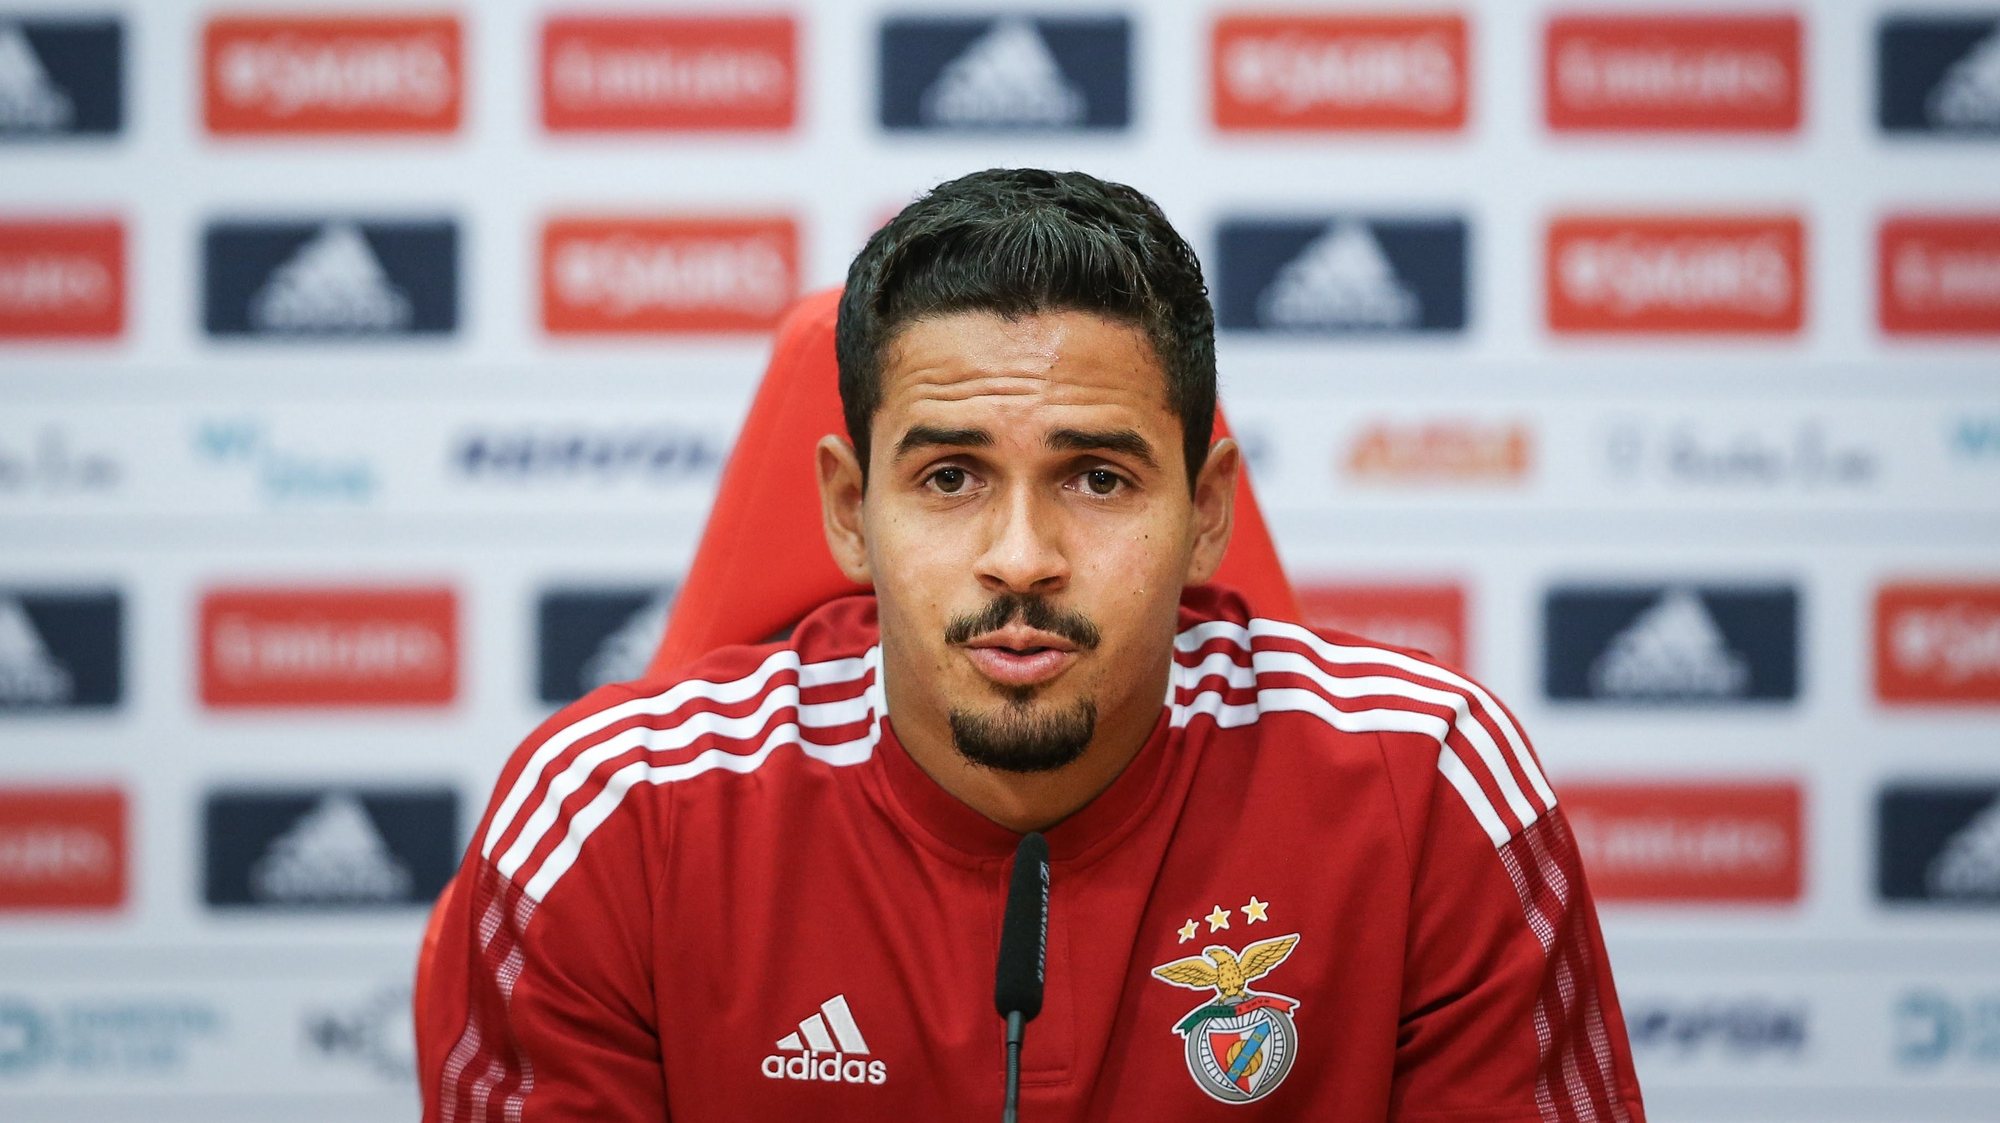 epa09407389 Benfica&#039;s player Lucas Verissimo attends a press conference at the the Seixal training center in Seixal, Portugal, 09 August 2021. Benfica will face Spartak Moscow in their UEFA Champions League Third qualifying round, second leg soccer match at Luz stadium in Lisbon on 10 August 2021.  EPA/RODRIGO ANTUNES